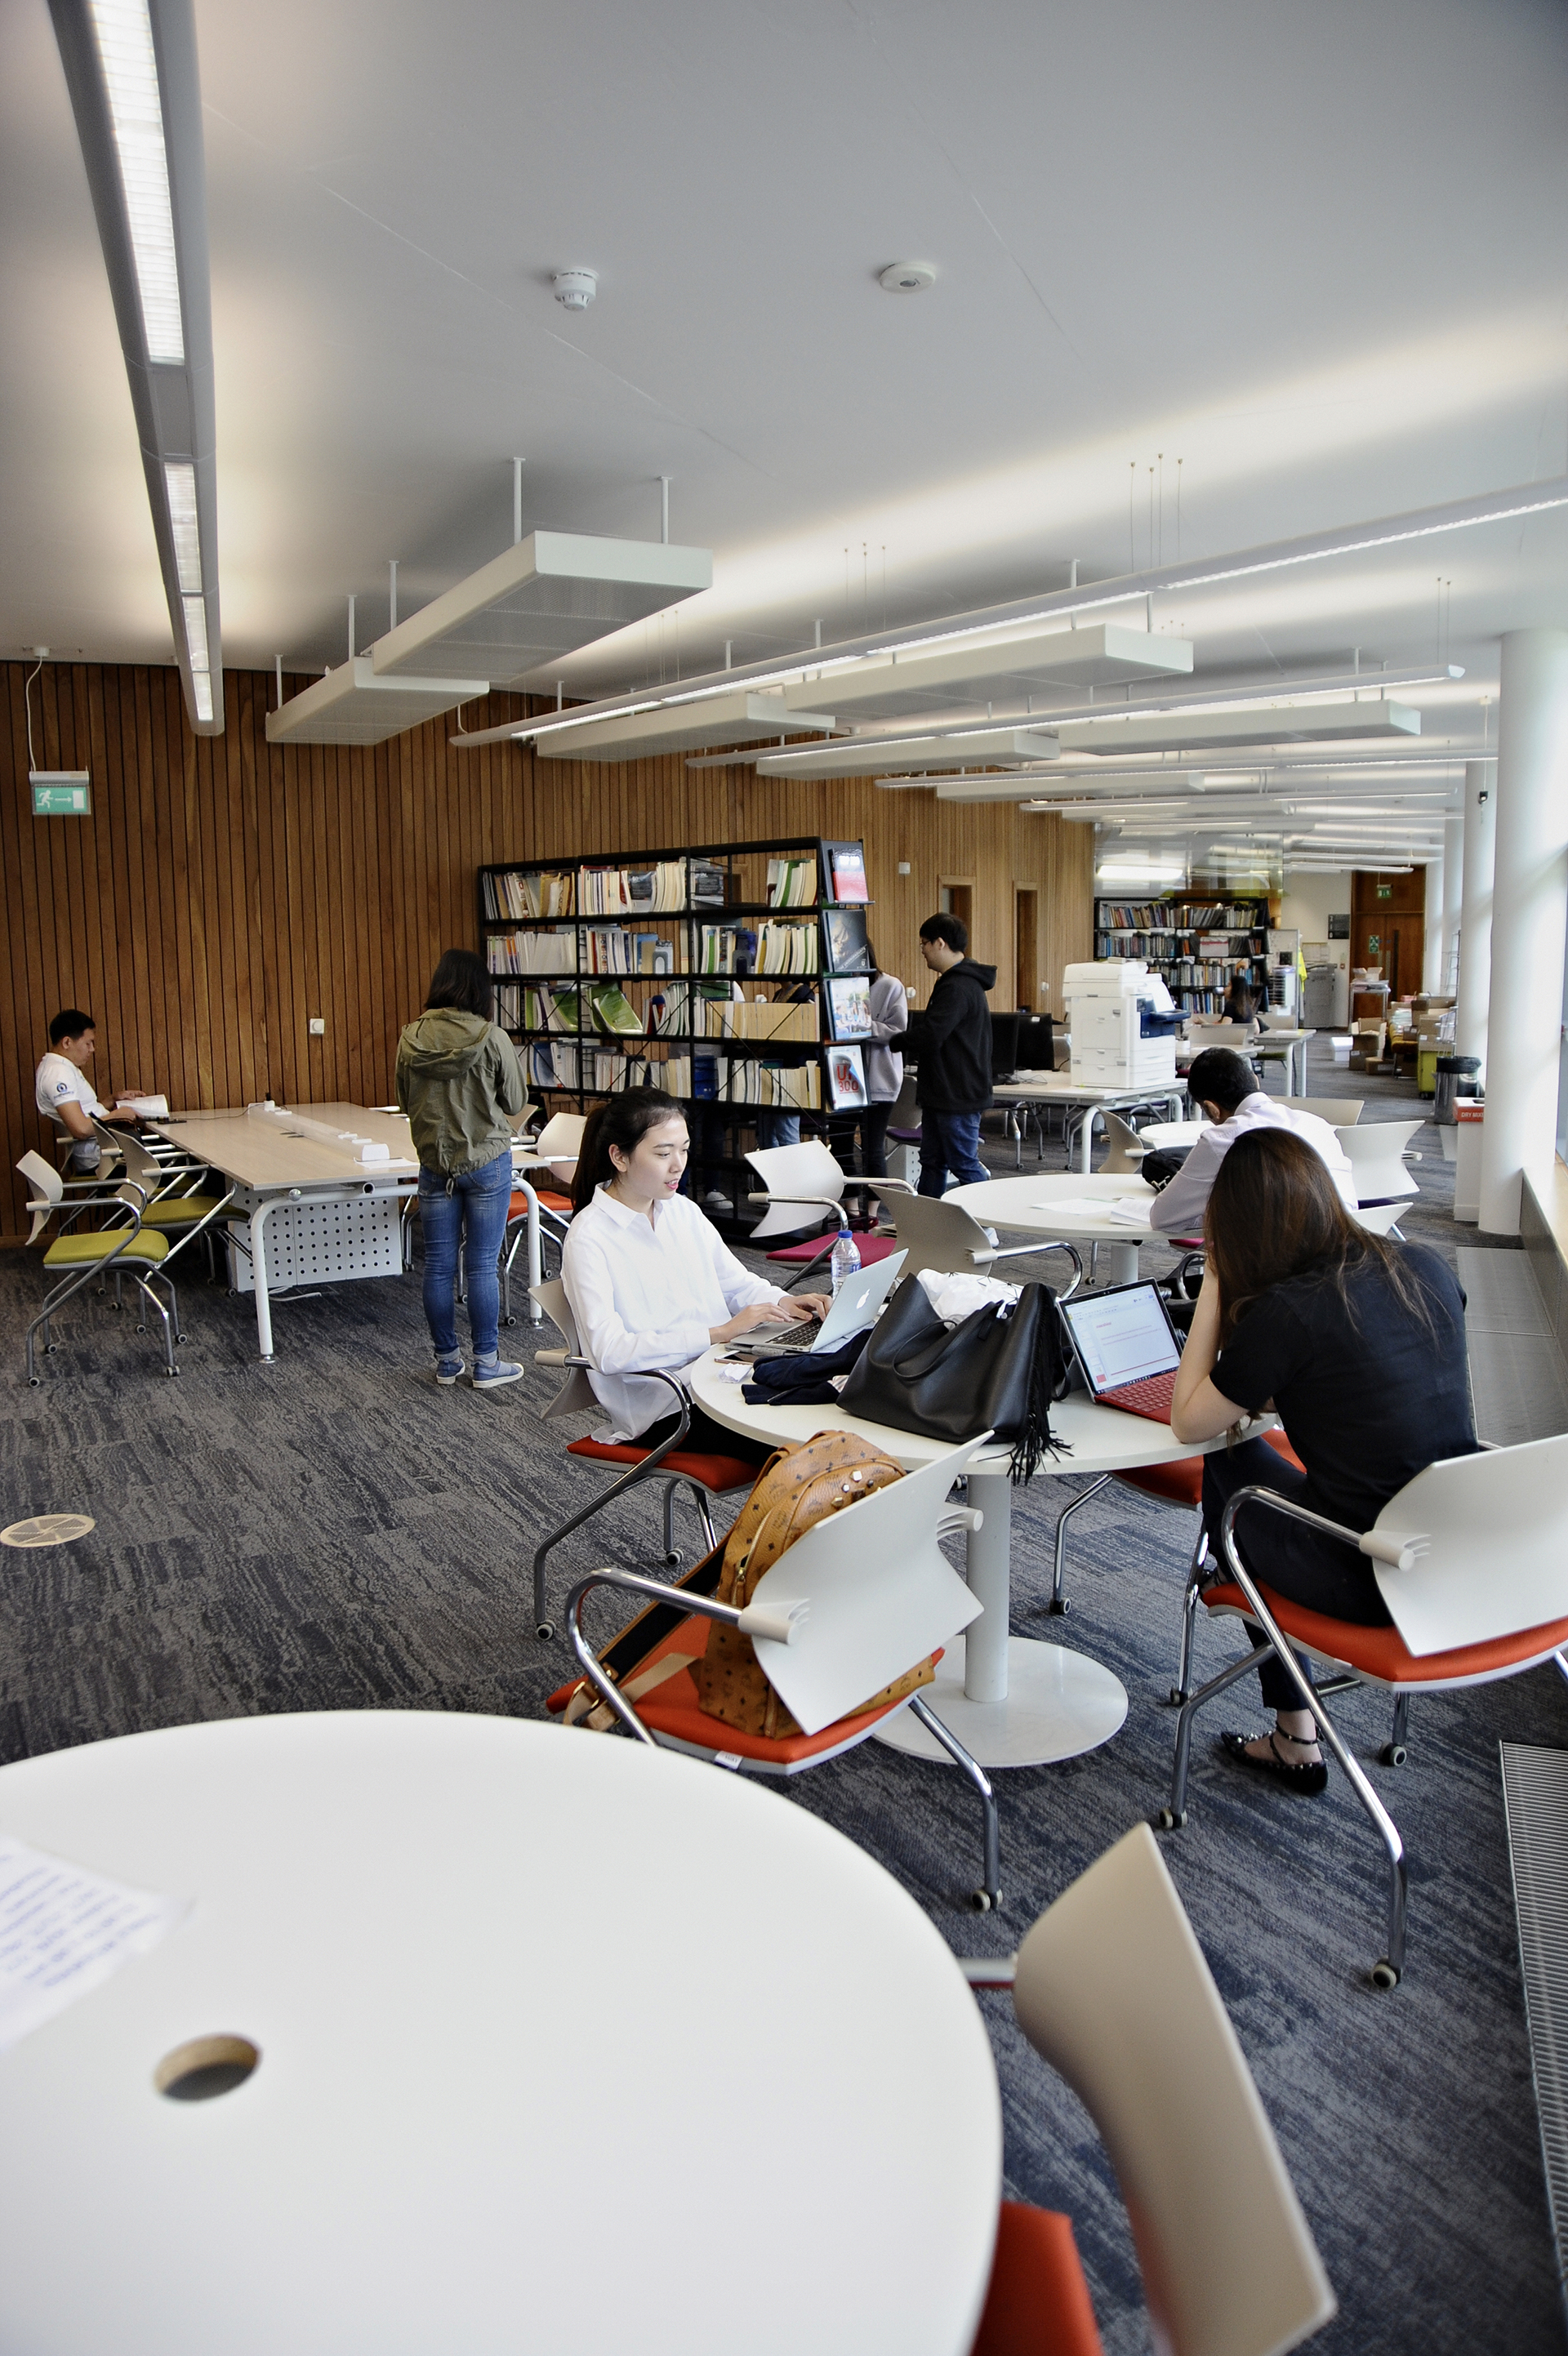 Learning Resource Centre with international students working